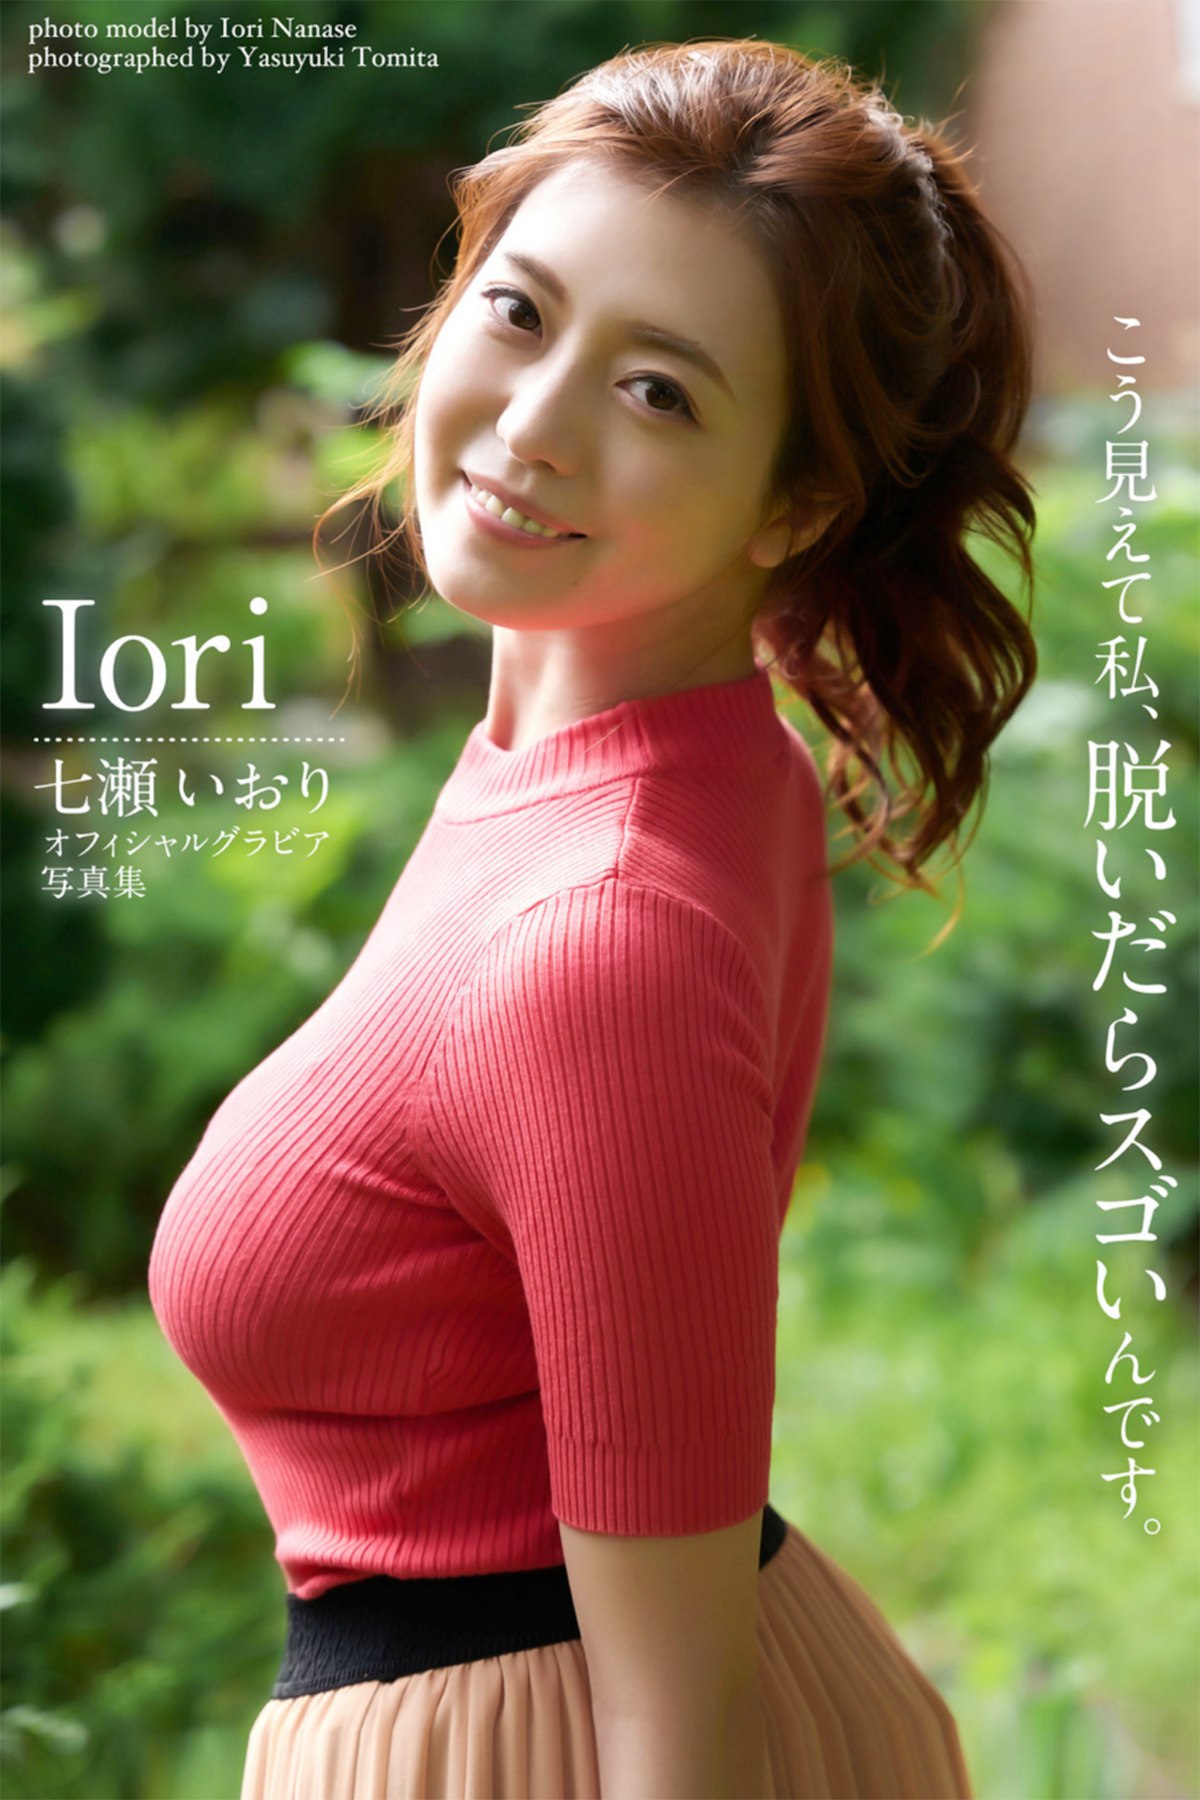 Photobook Iori Nanase 七瀬いおり – I Look Like This But When I Take My Clothes Off